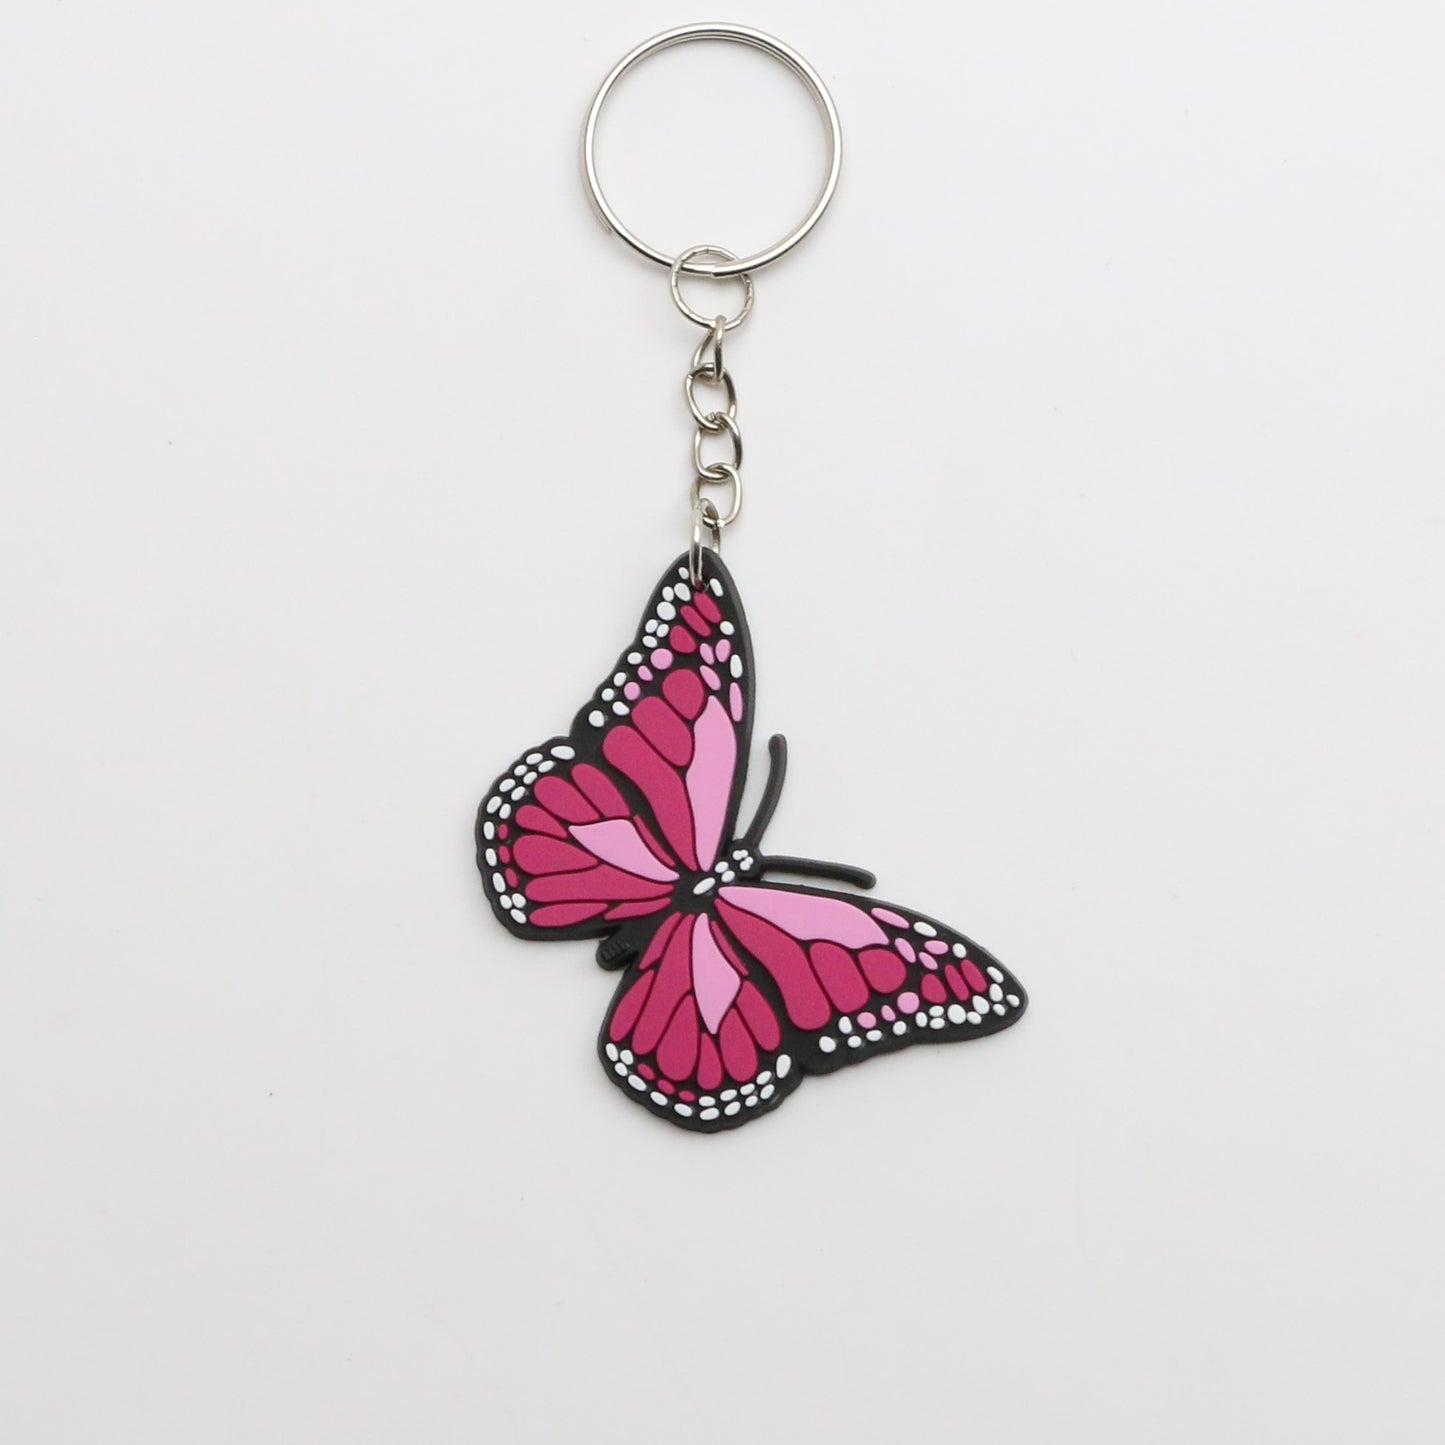 8100207K - Charm - Keychain - Butterfly - Lg. - Pink